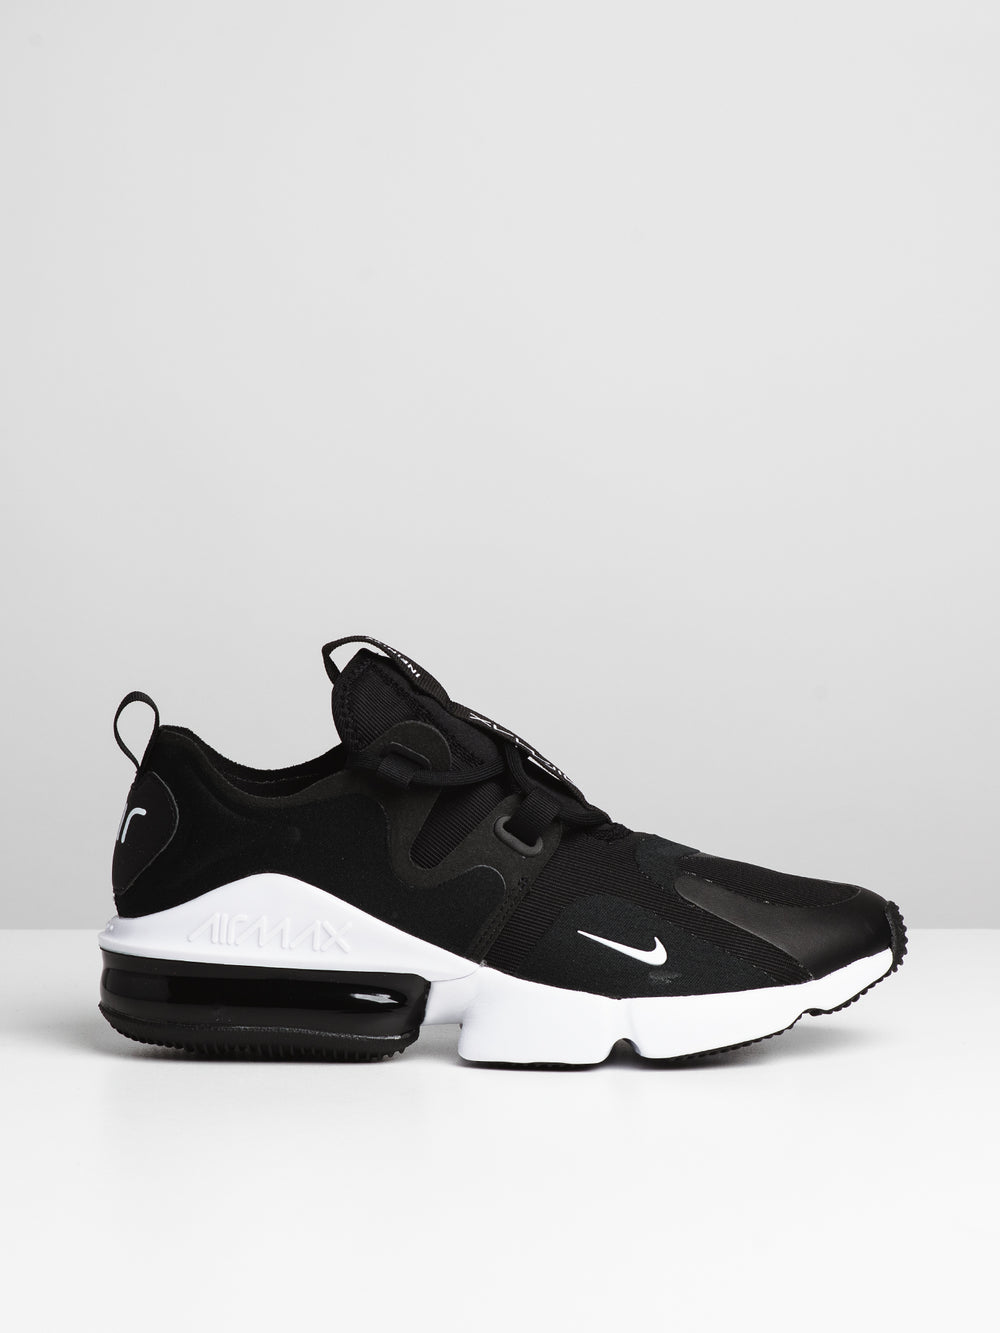 MENS AIR MAX INFINITY - BLACK/WHITE - CLEARANCE